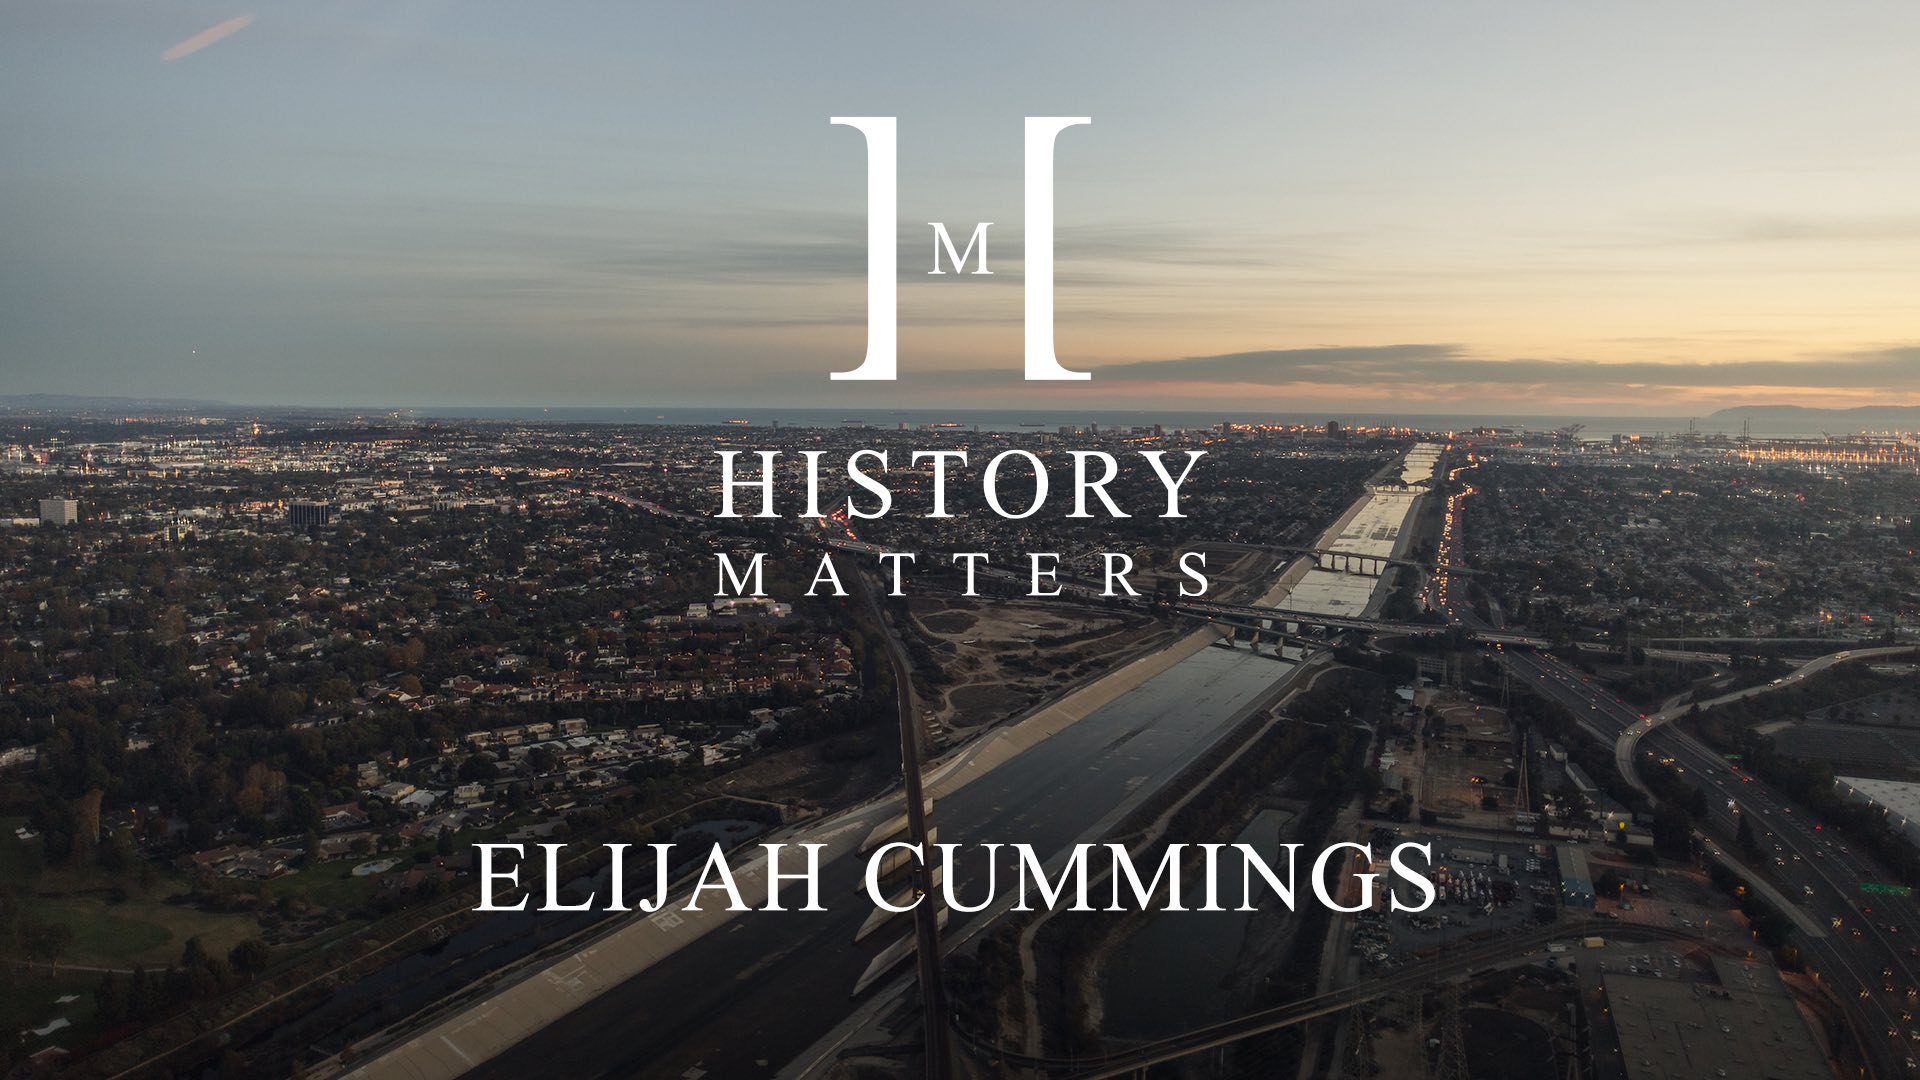 White HM Elijah Cummings logo with background aerial view of city with bridges crossing a waterway